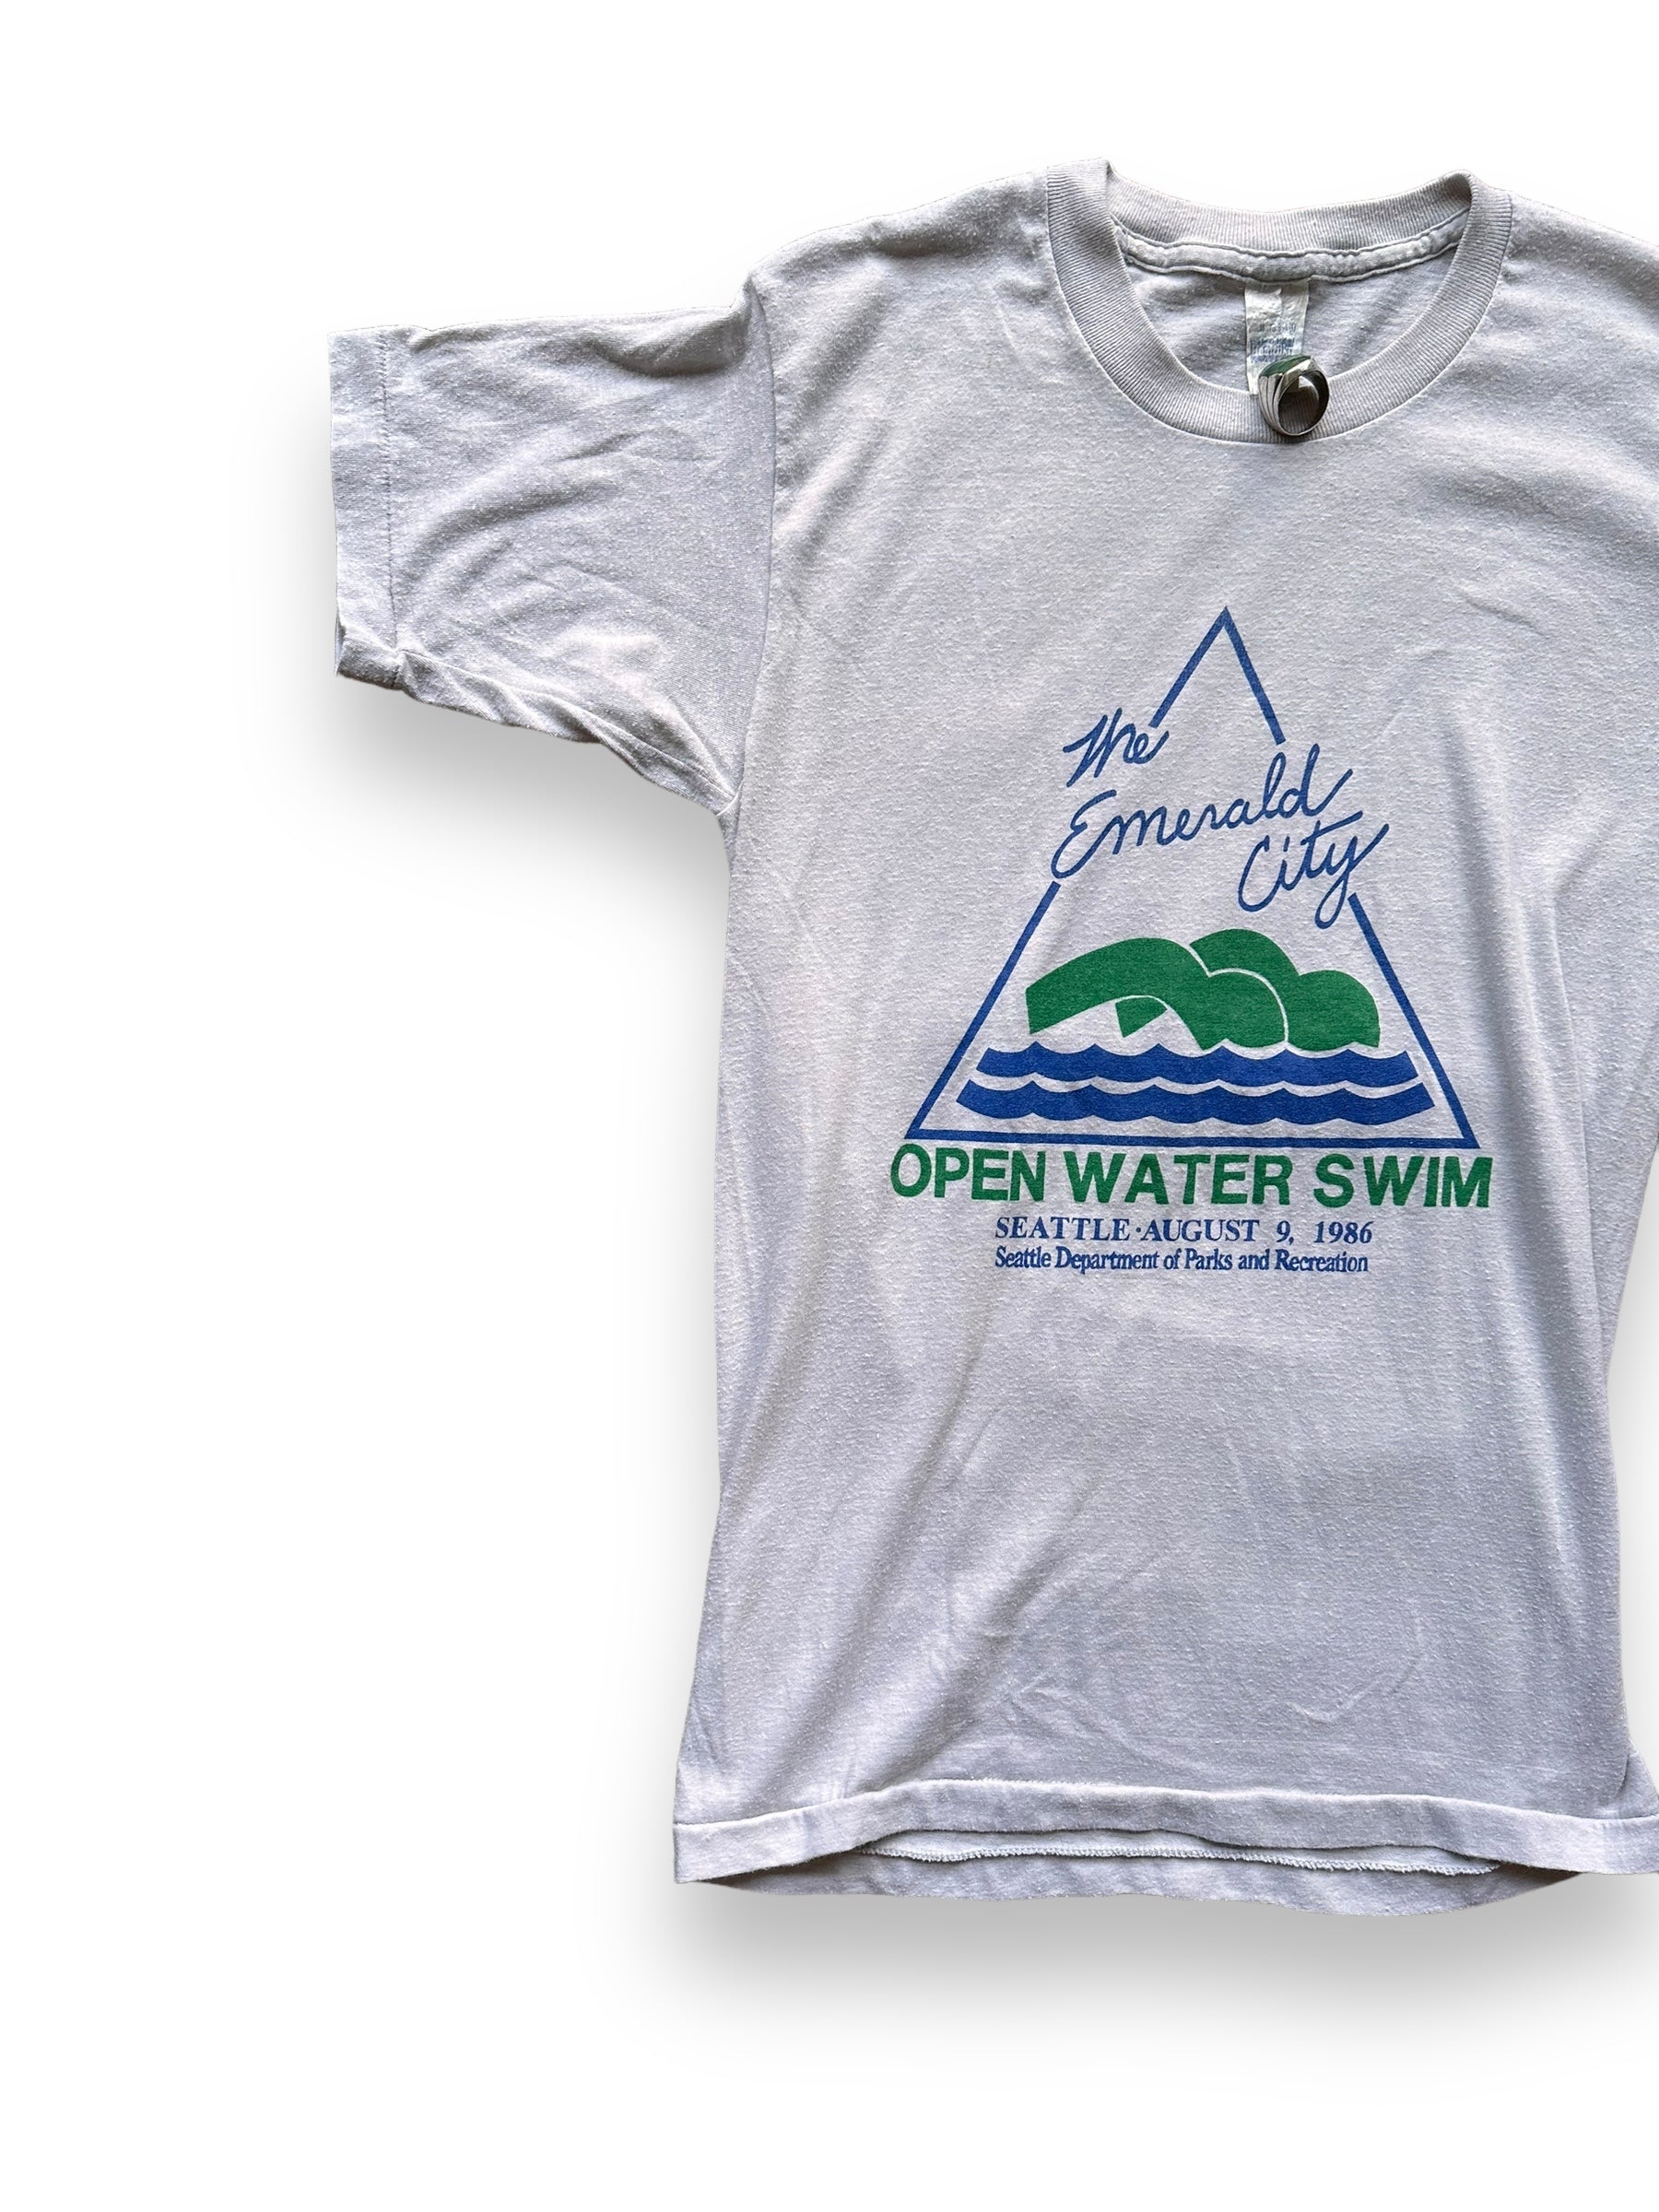 Front Right View of Vintage Emerald City Open Water Swim Tee SZ M | Barn Owl Vintage Tees | Vintage Graphic Tees Seattle